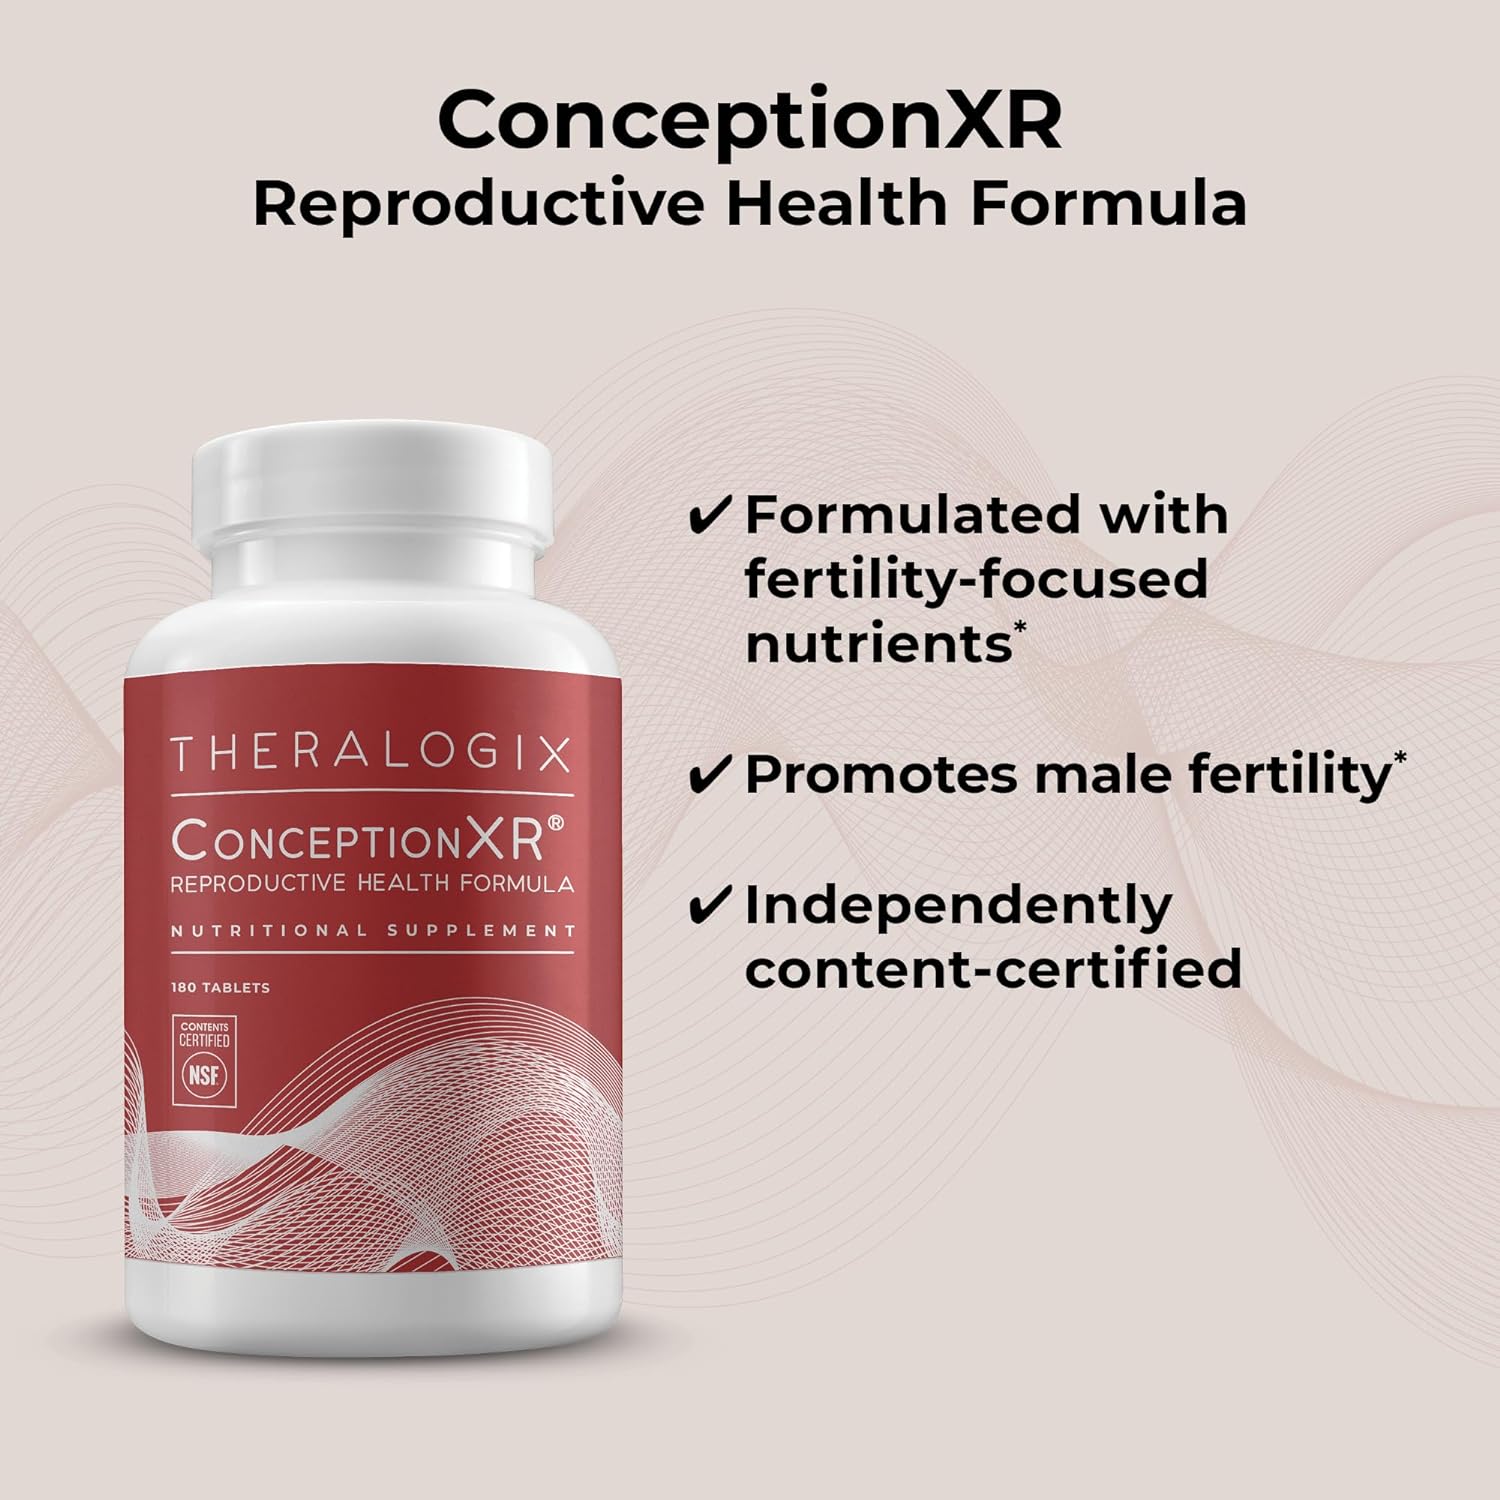 Theralogix ConceptionXR Reproductive Health Formula - Men's Preconception Vitamins for Fertility Support - Male Fertility Supplements for Sperm Health* - NSF Certified - 180 Tabs (90-Day Supply) : Health & Household